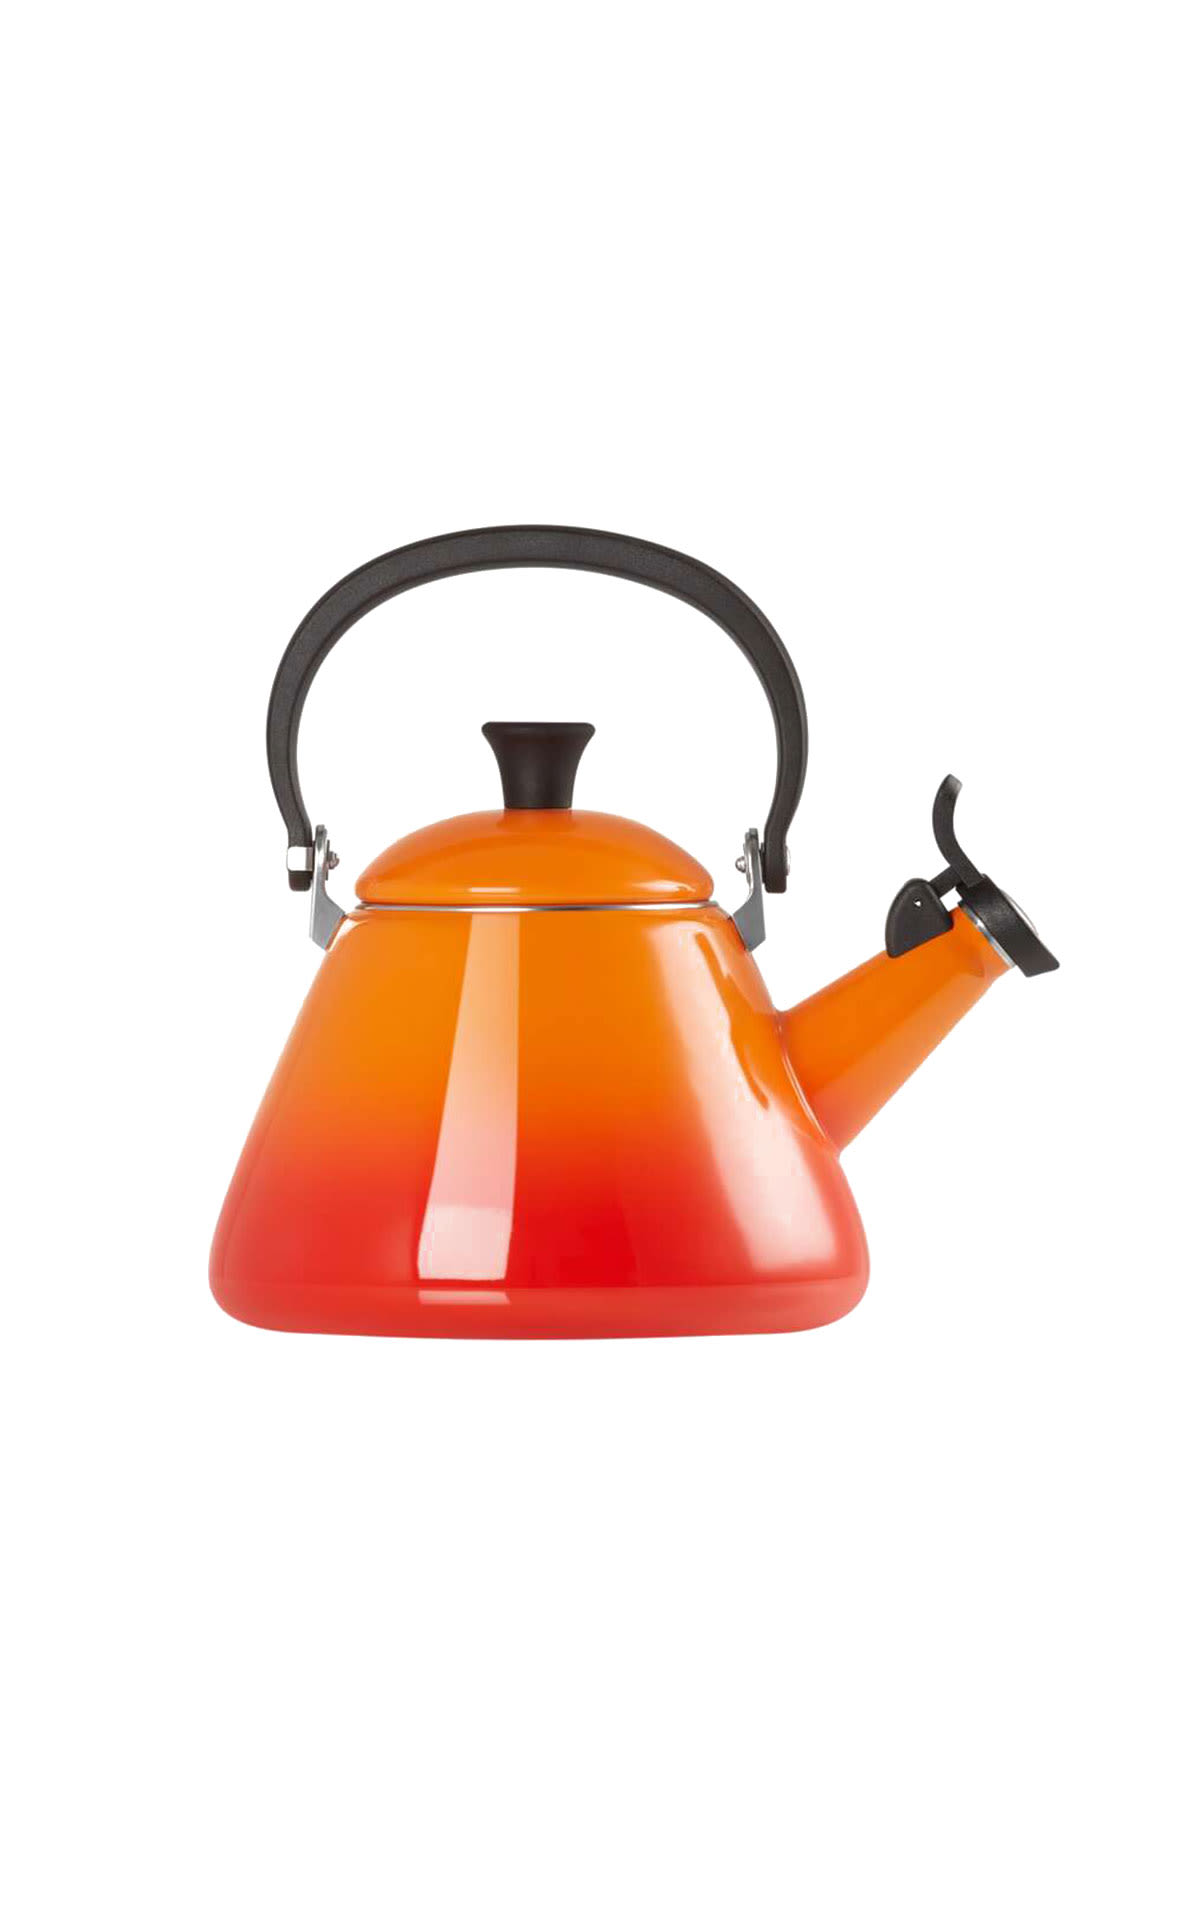 Red and orange traditional teapot le creuset